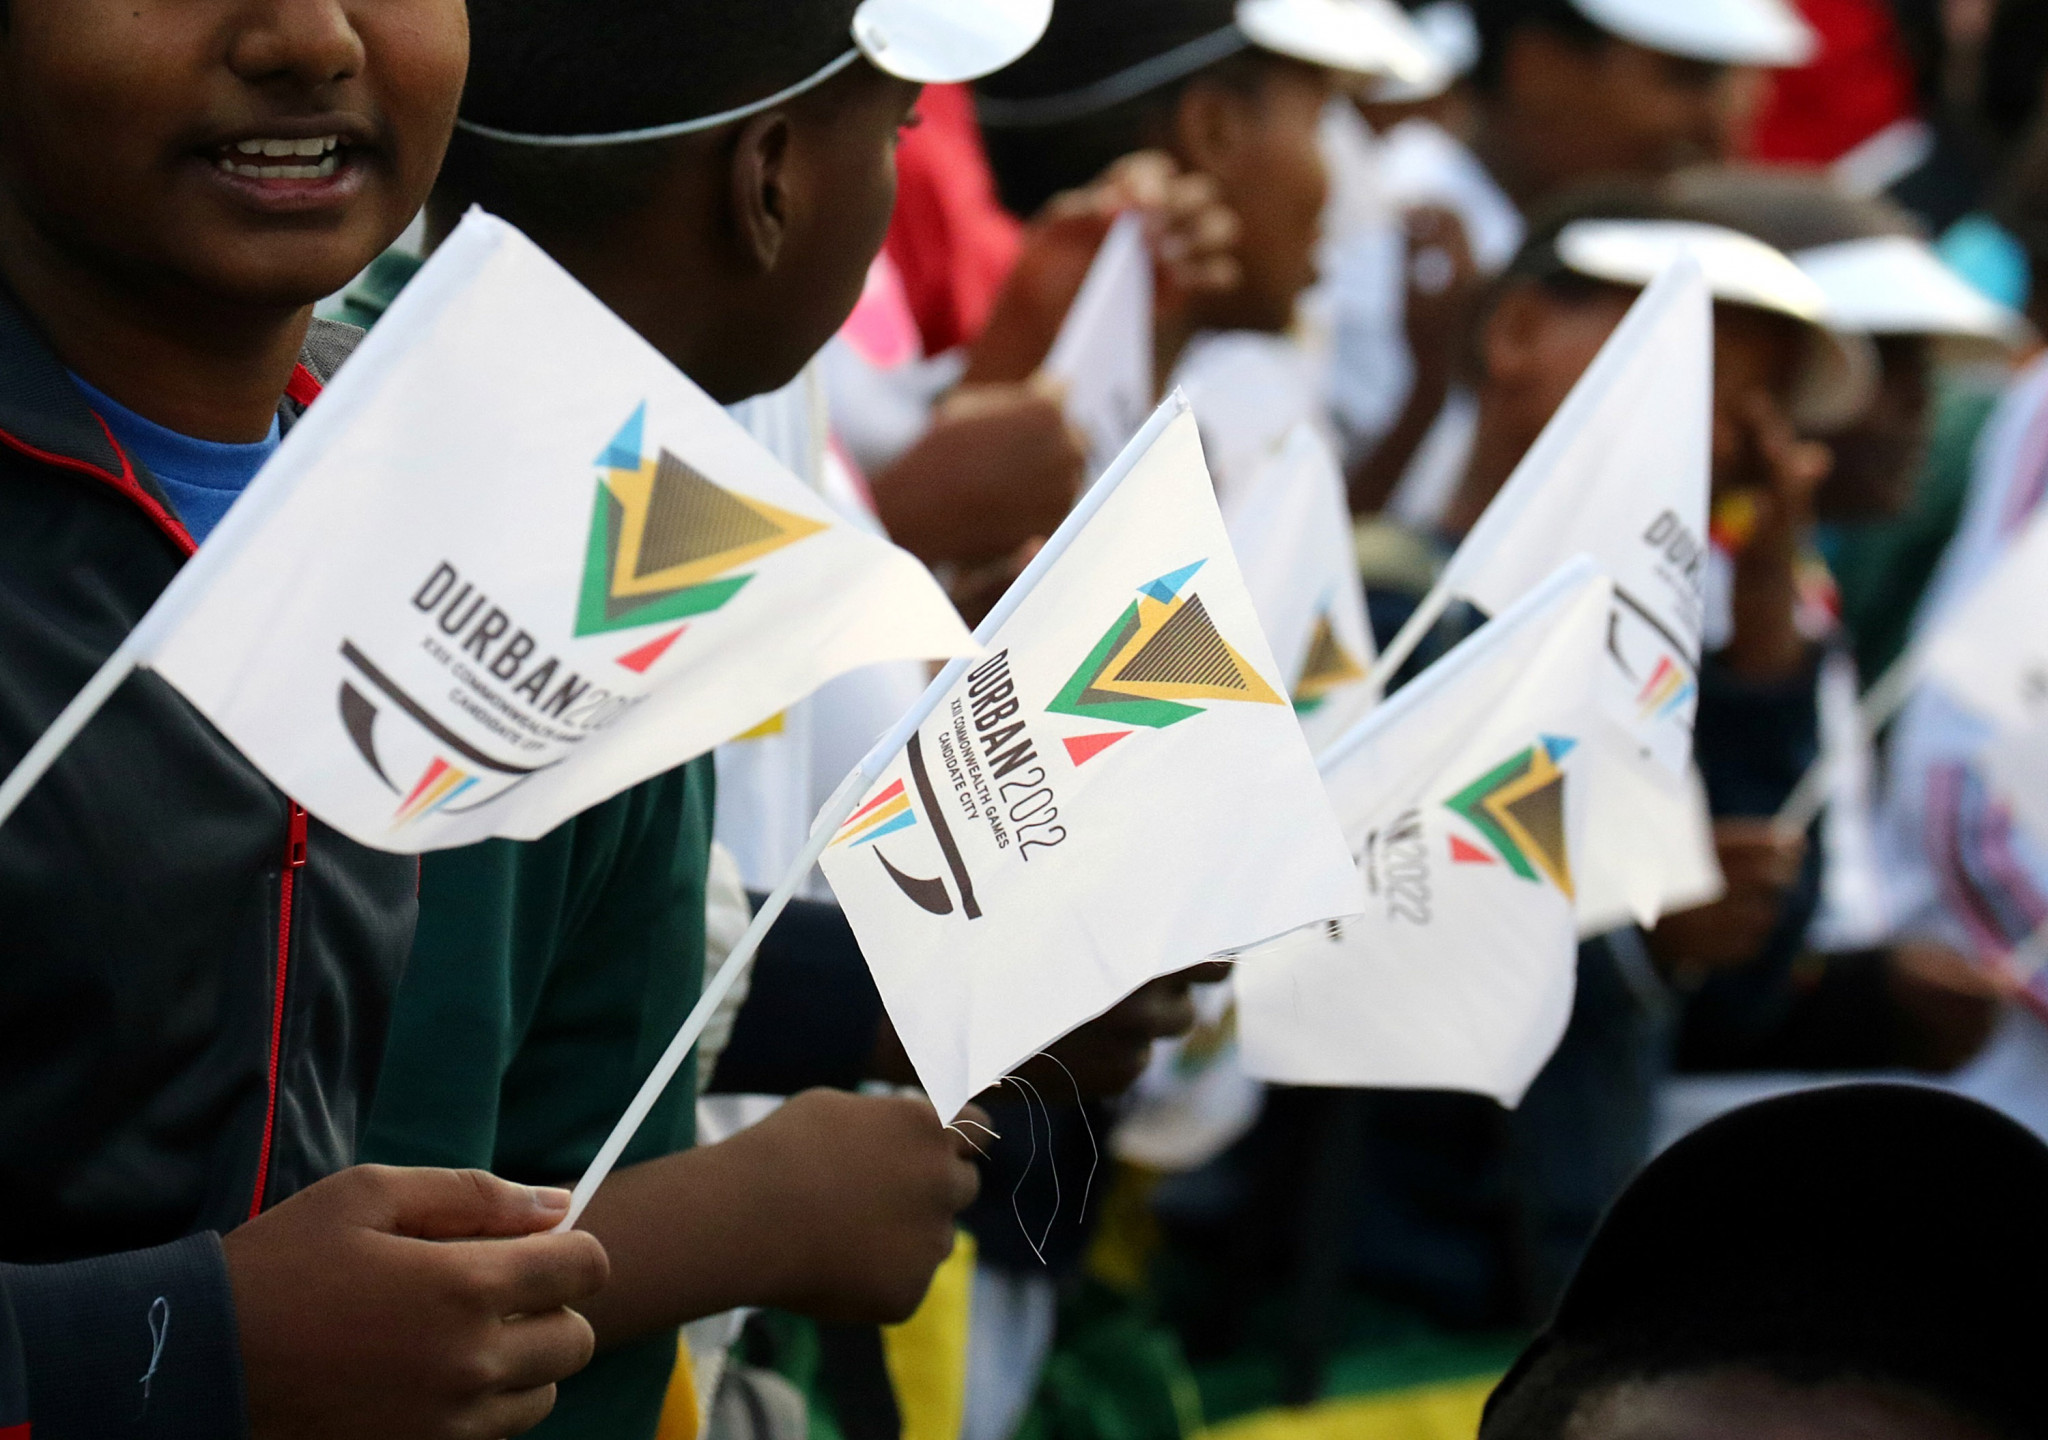 The doomed Durban bid for the 2022 Commonwealth Games is not comparable to the Rugby World Cup process, according to South Africa's Sports Minister ©Getty Images